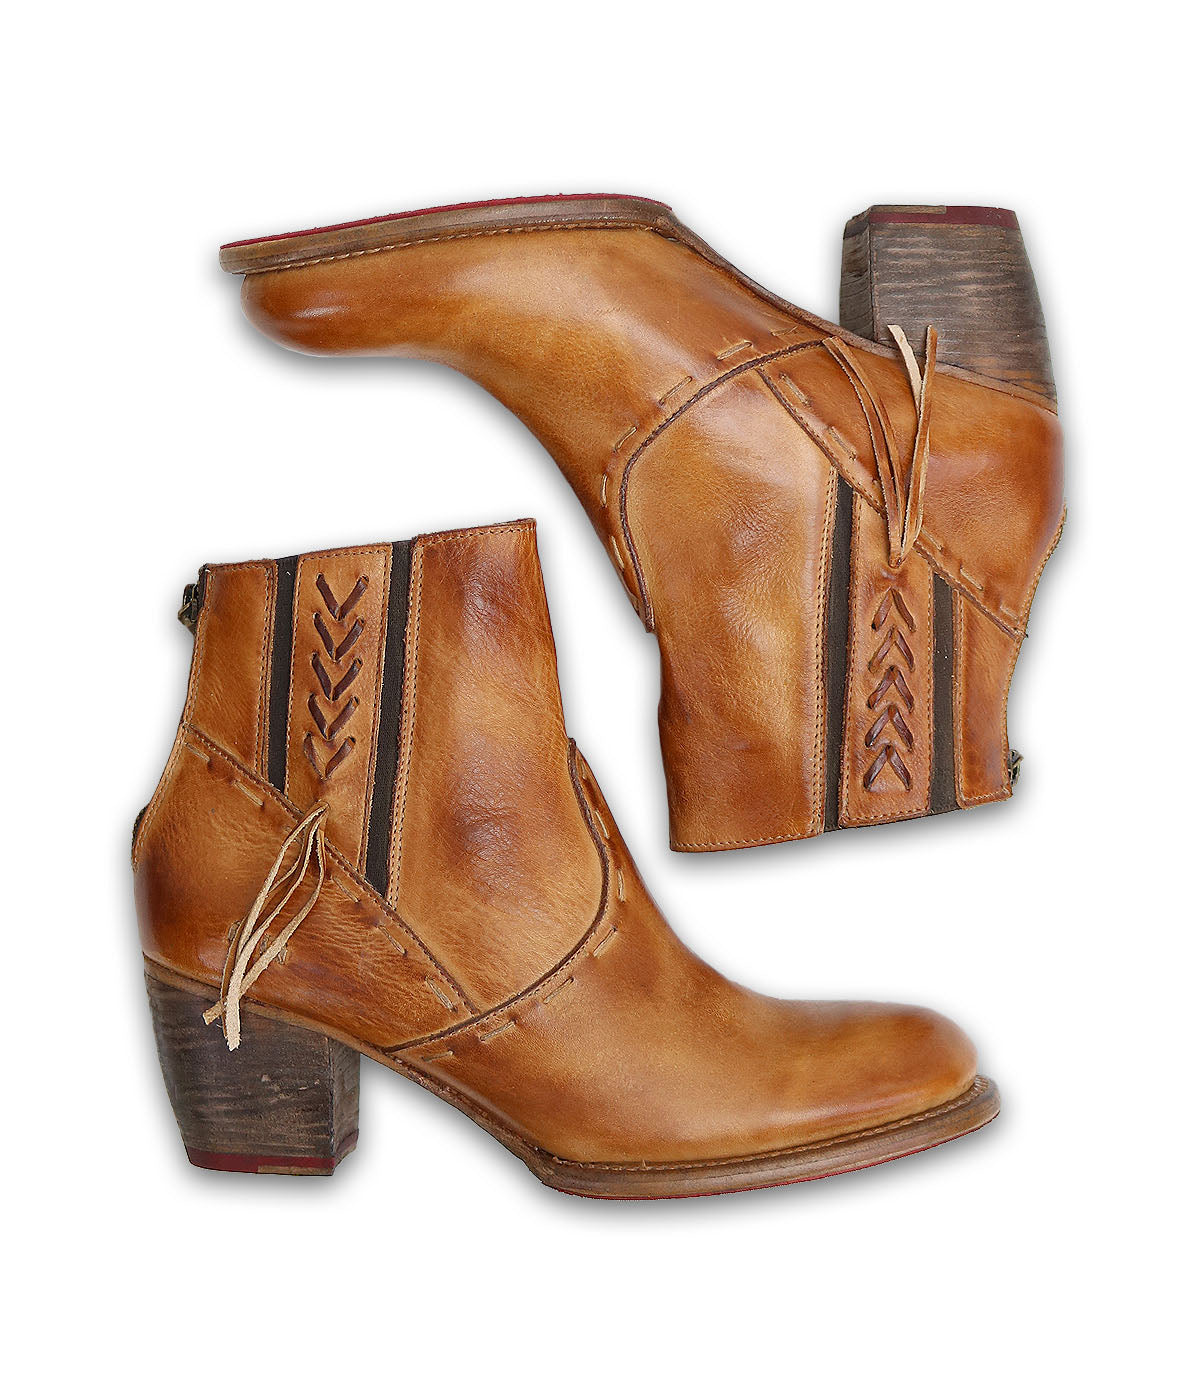 A pair of Celestine ankle boots by Bed Stu, made of tan leather.